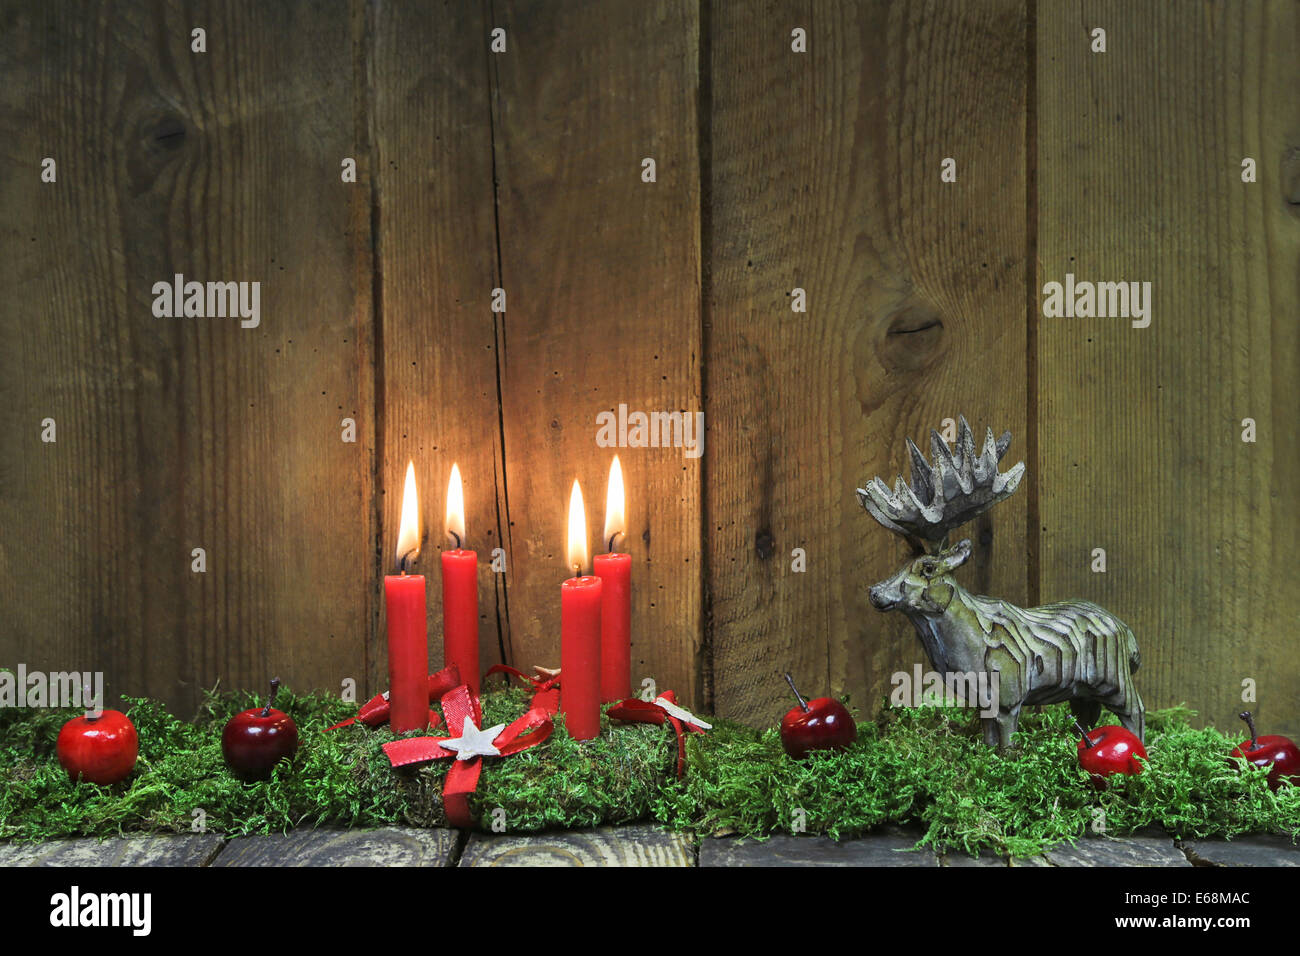 Classic: Four red burning christmas candles on wood background with deer. Stock Photo